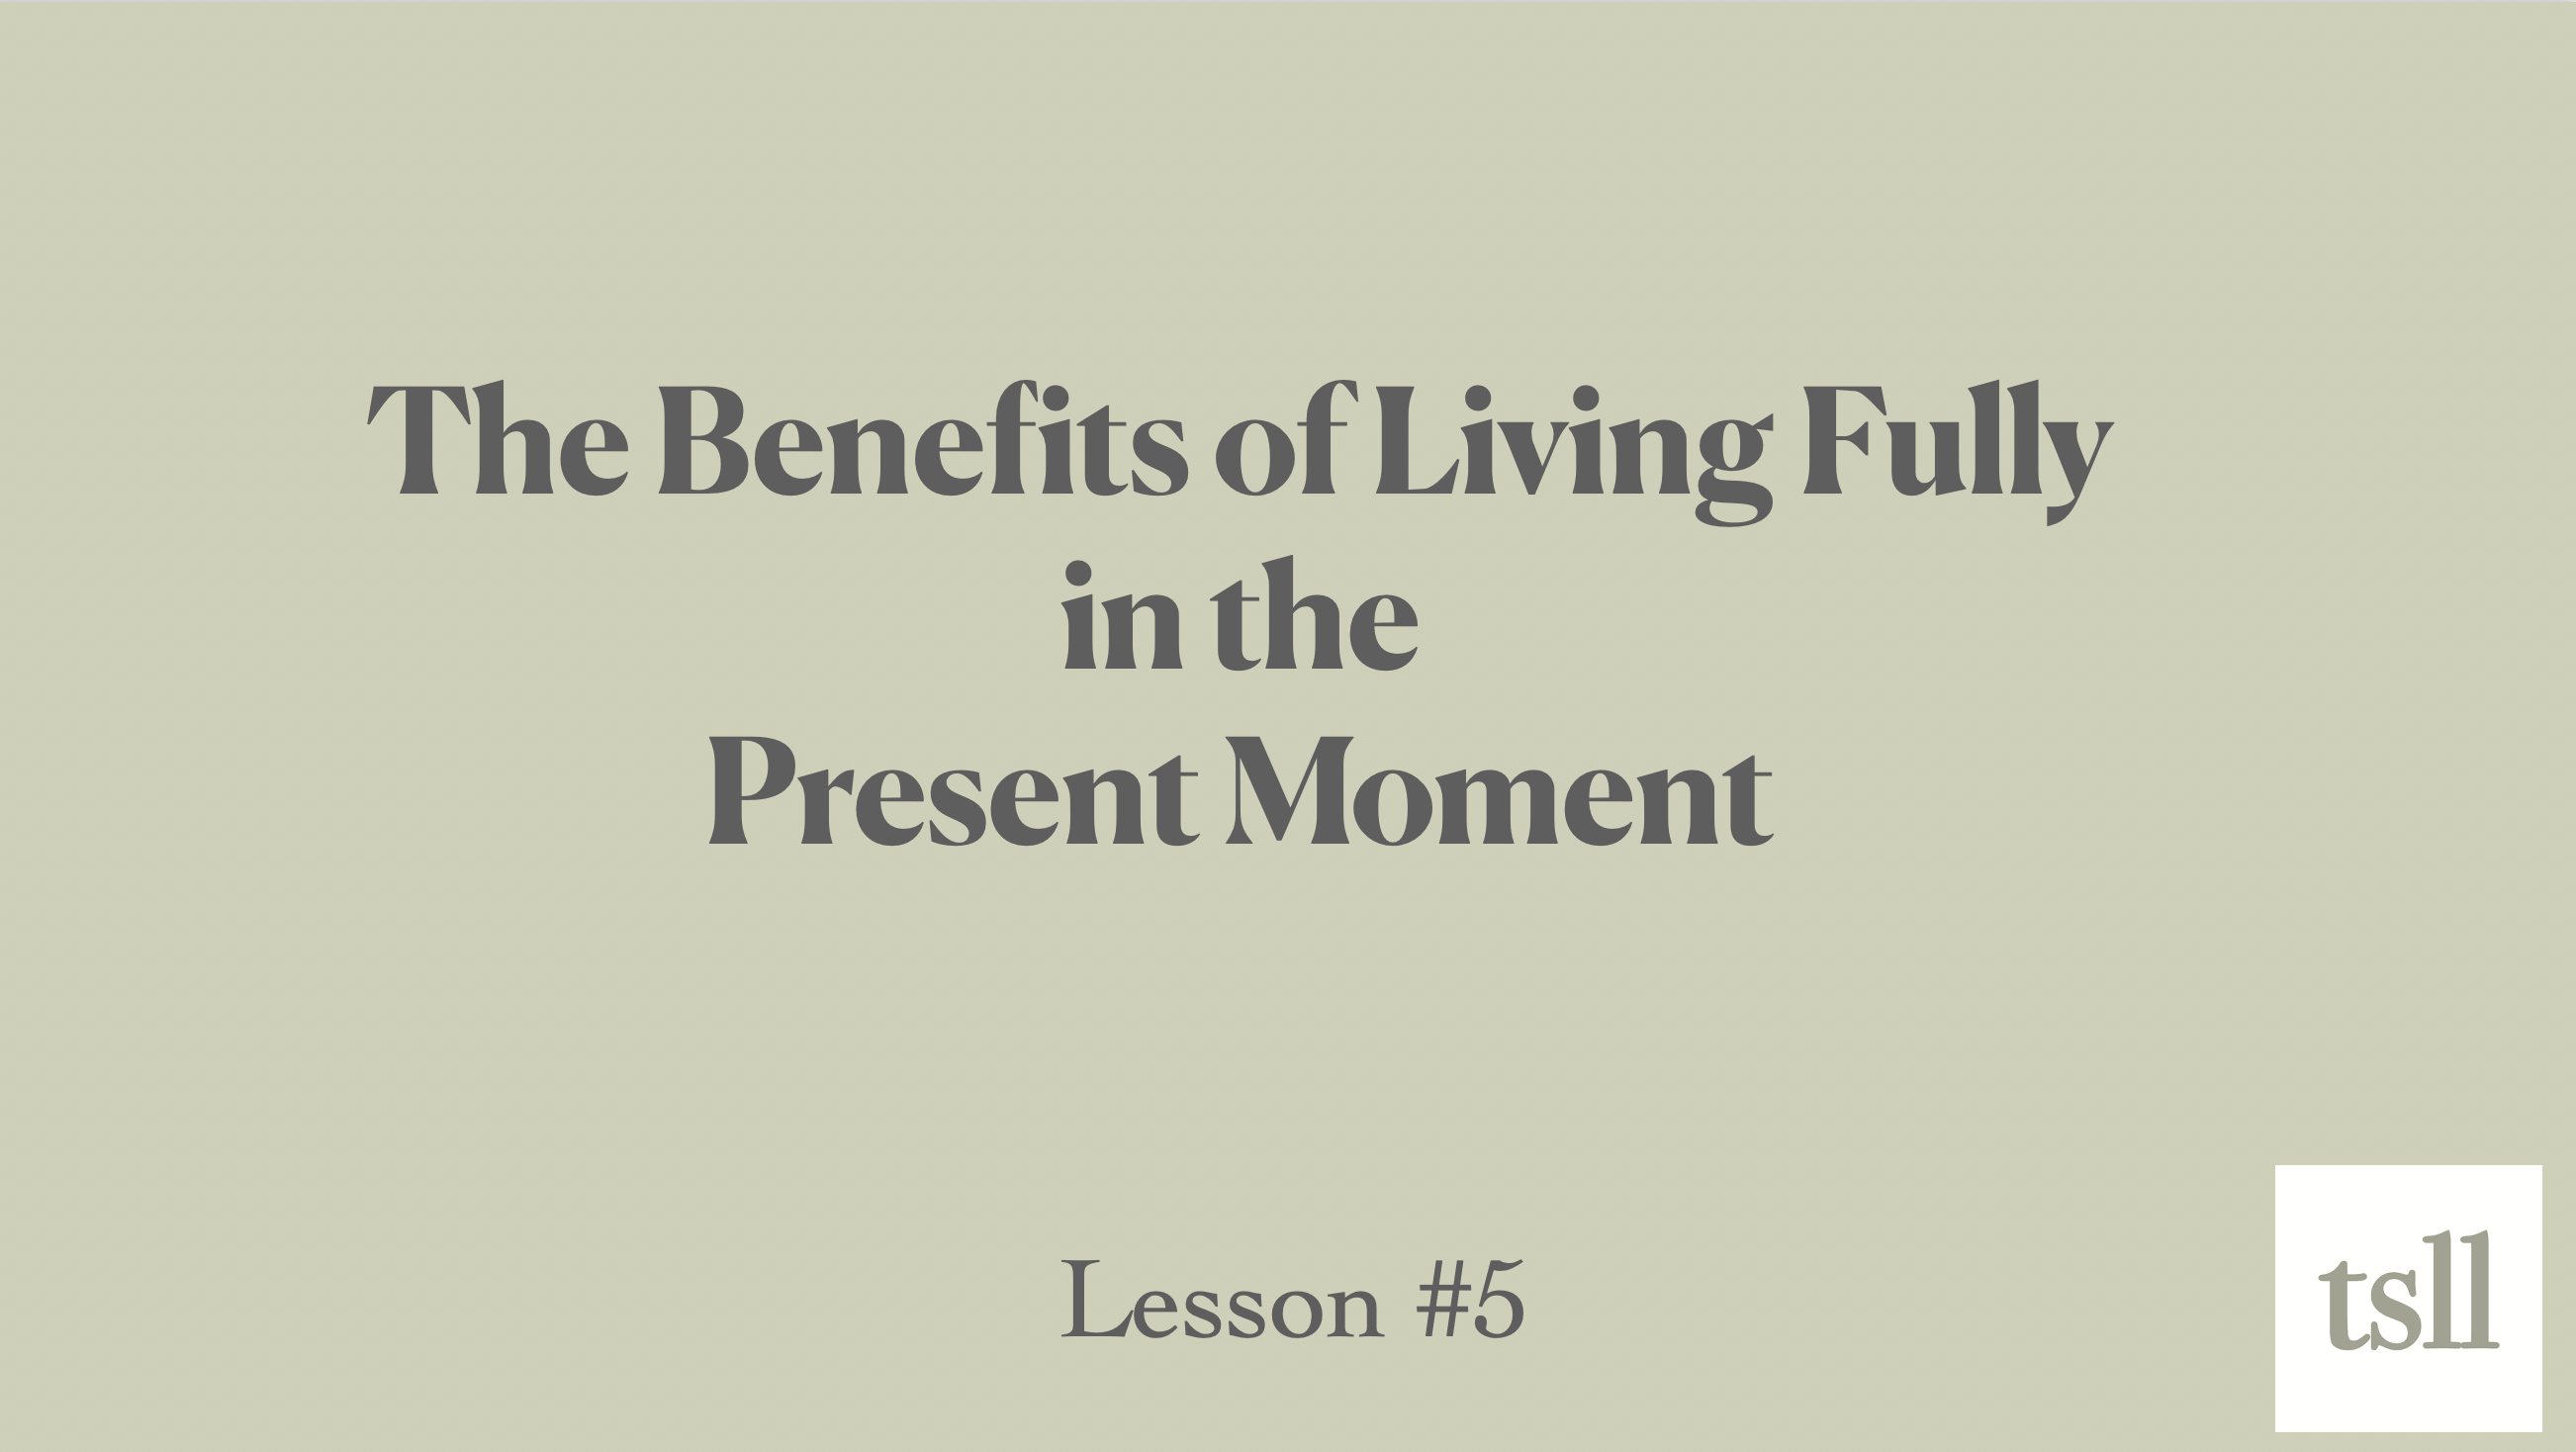 Part 7: The Benefits of Living Fully in the Present Moment (5:22)